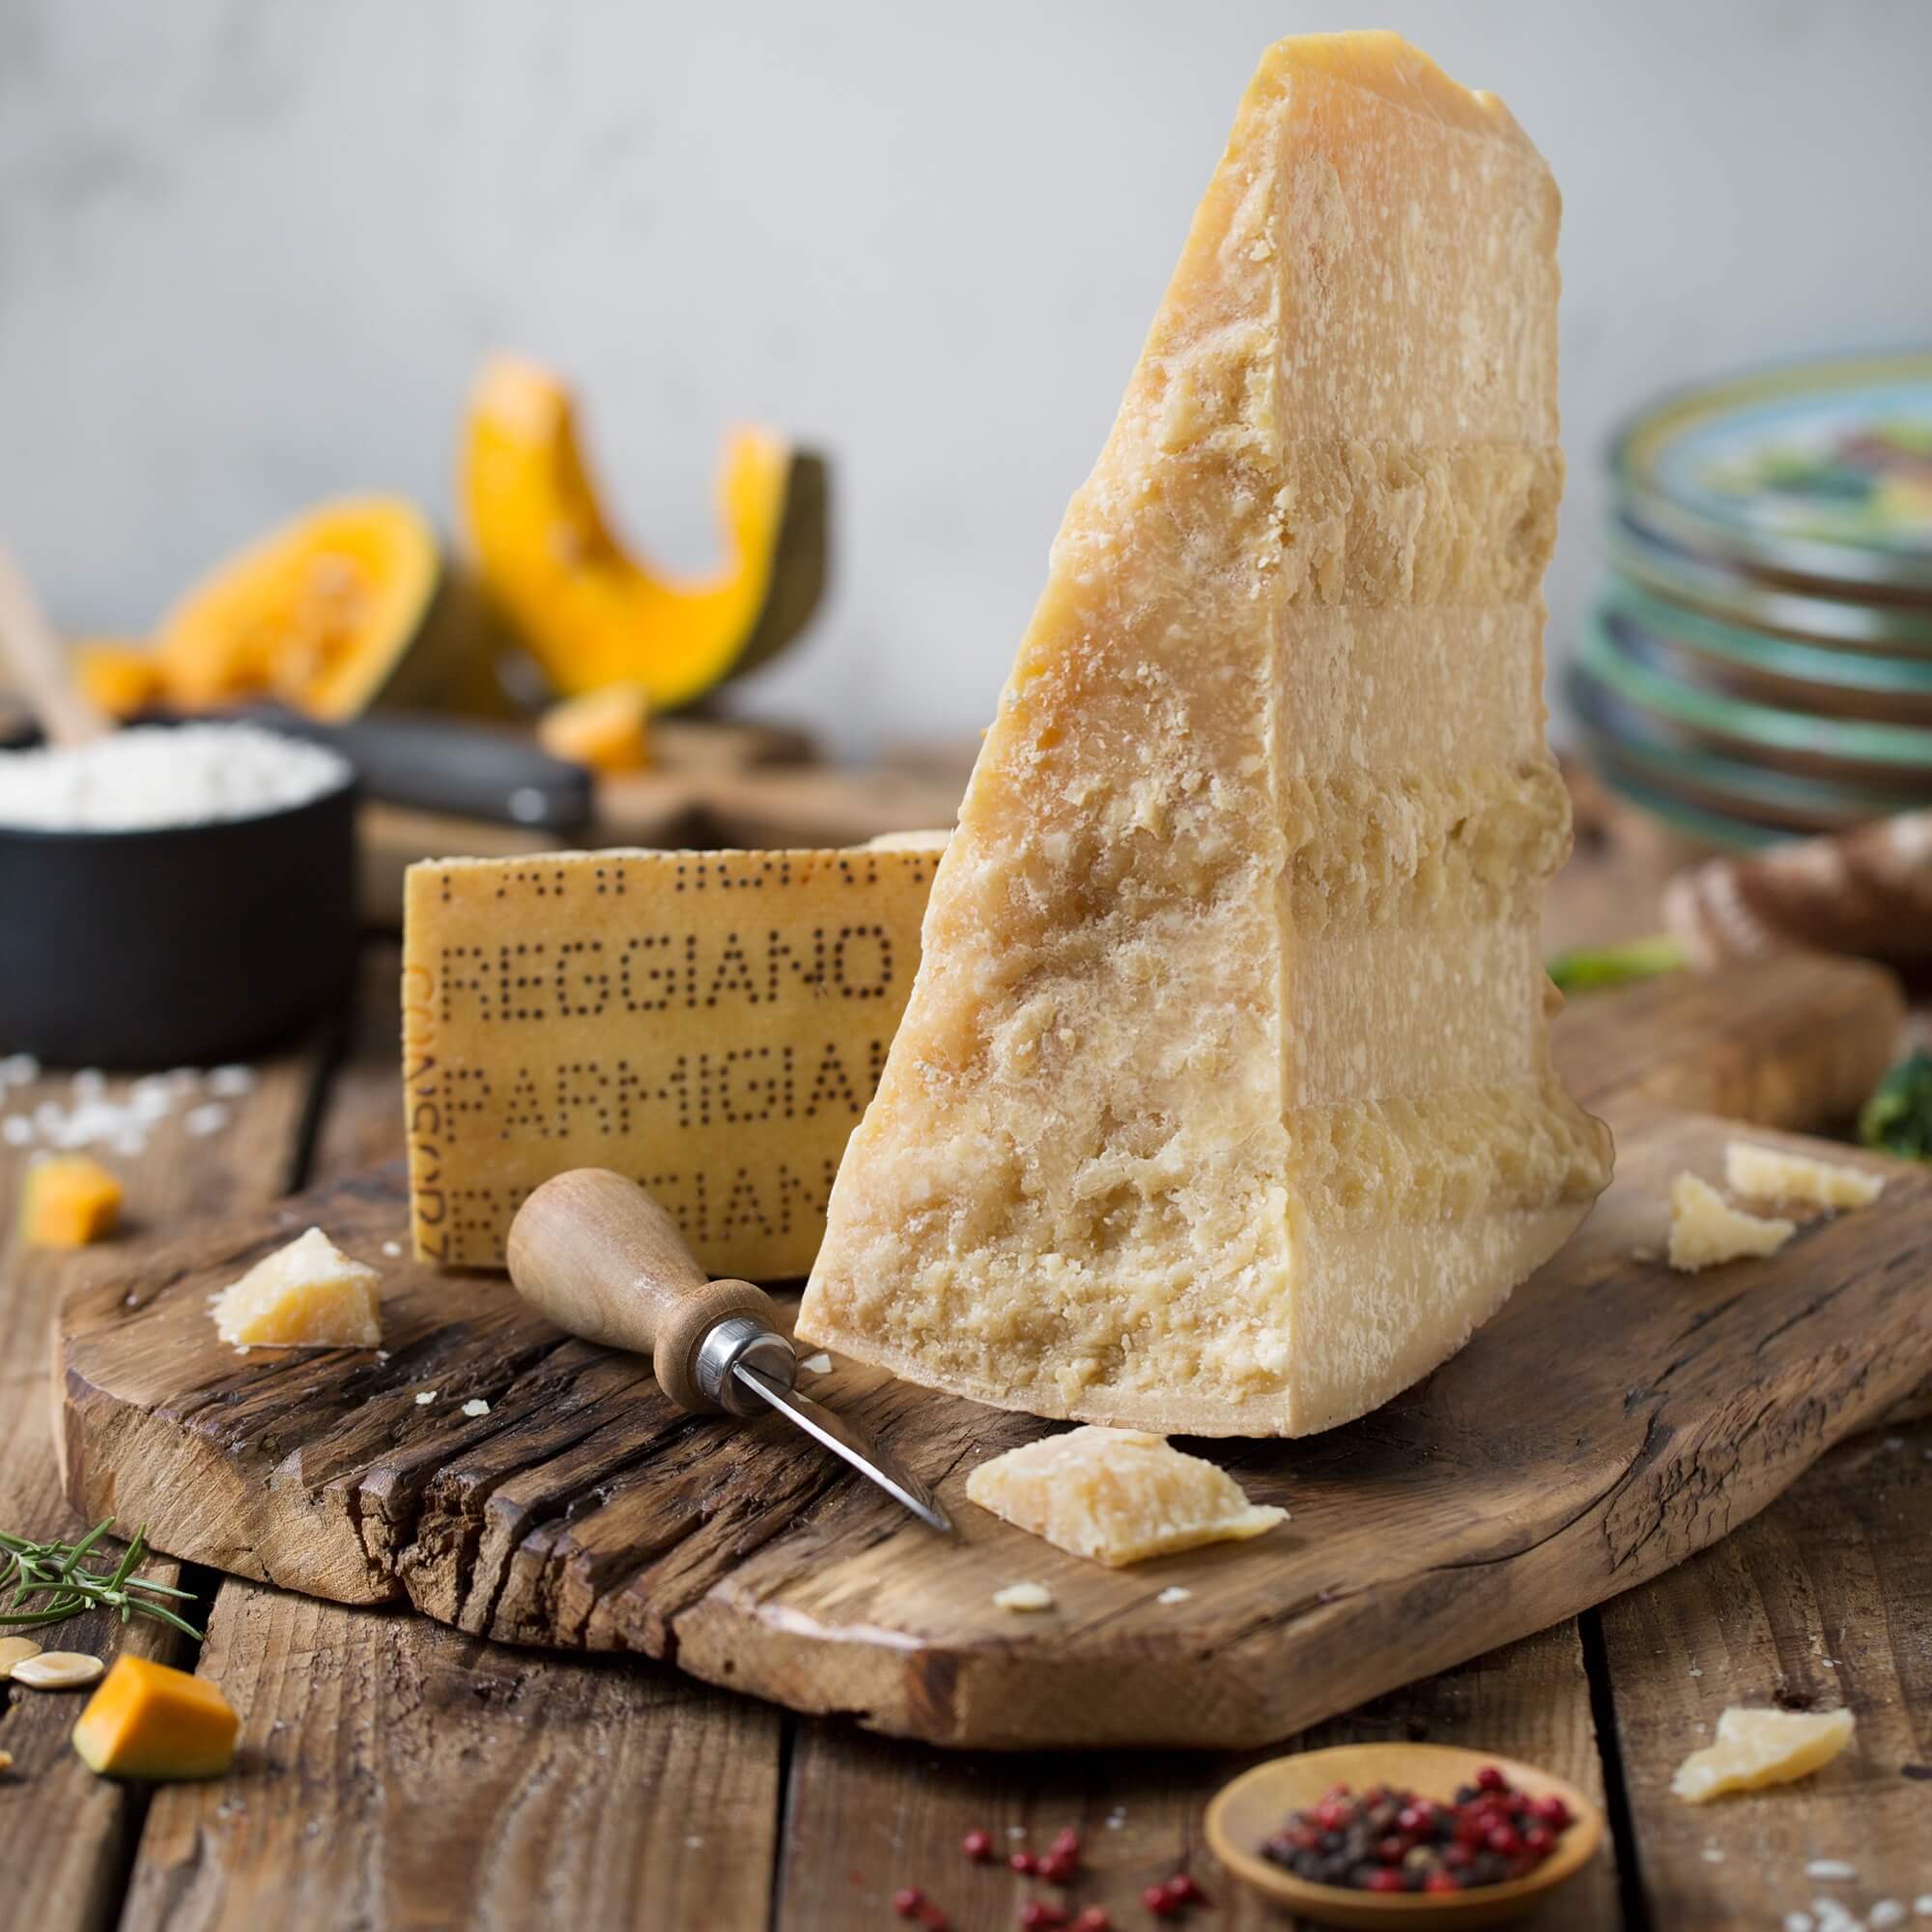 Parmigiano Reggiano DOP 120 months (10 years - Limited Edition)